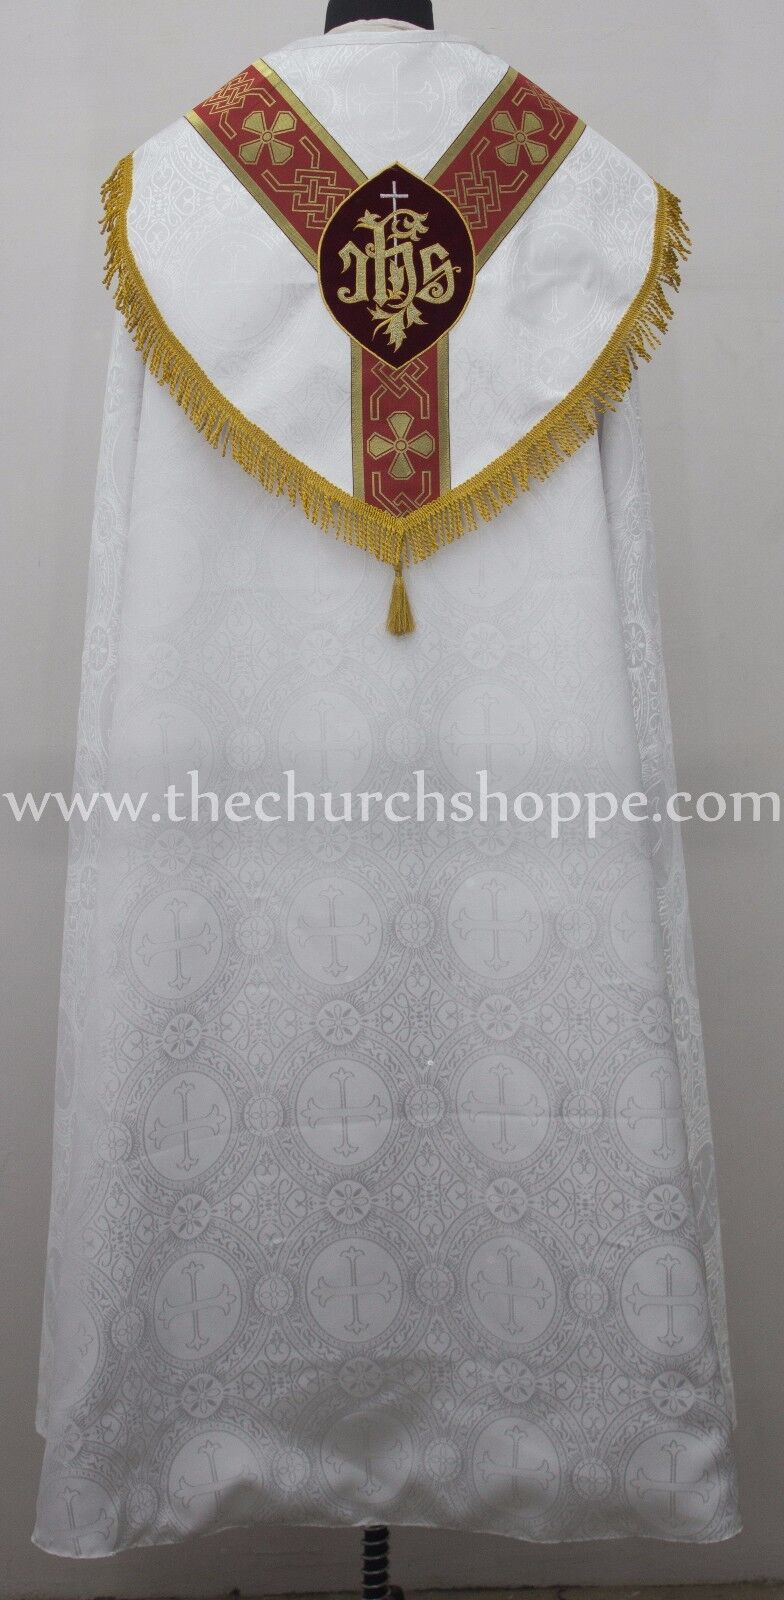 NEW White Cope & Stole Set with IHS embroidery,capa pluvial,chape,far fronte